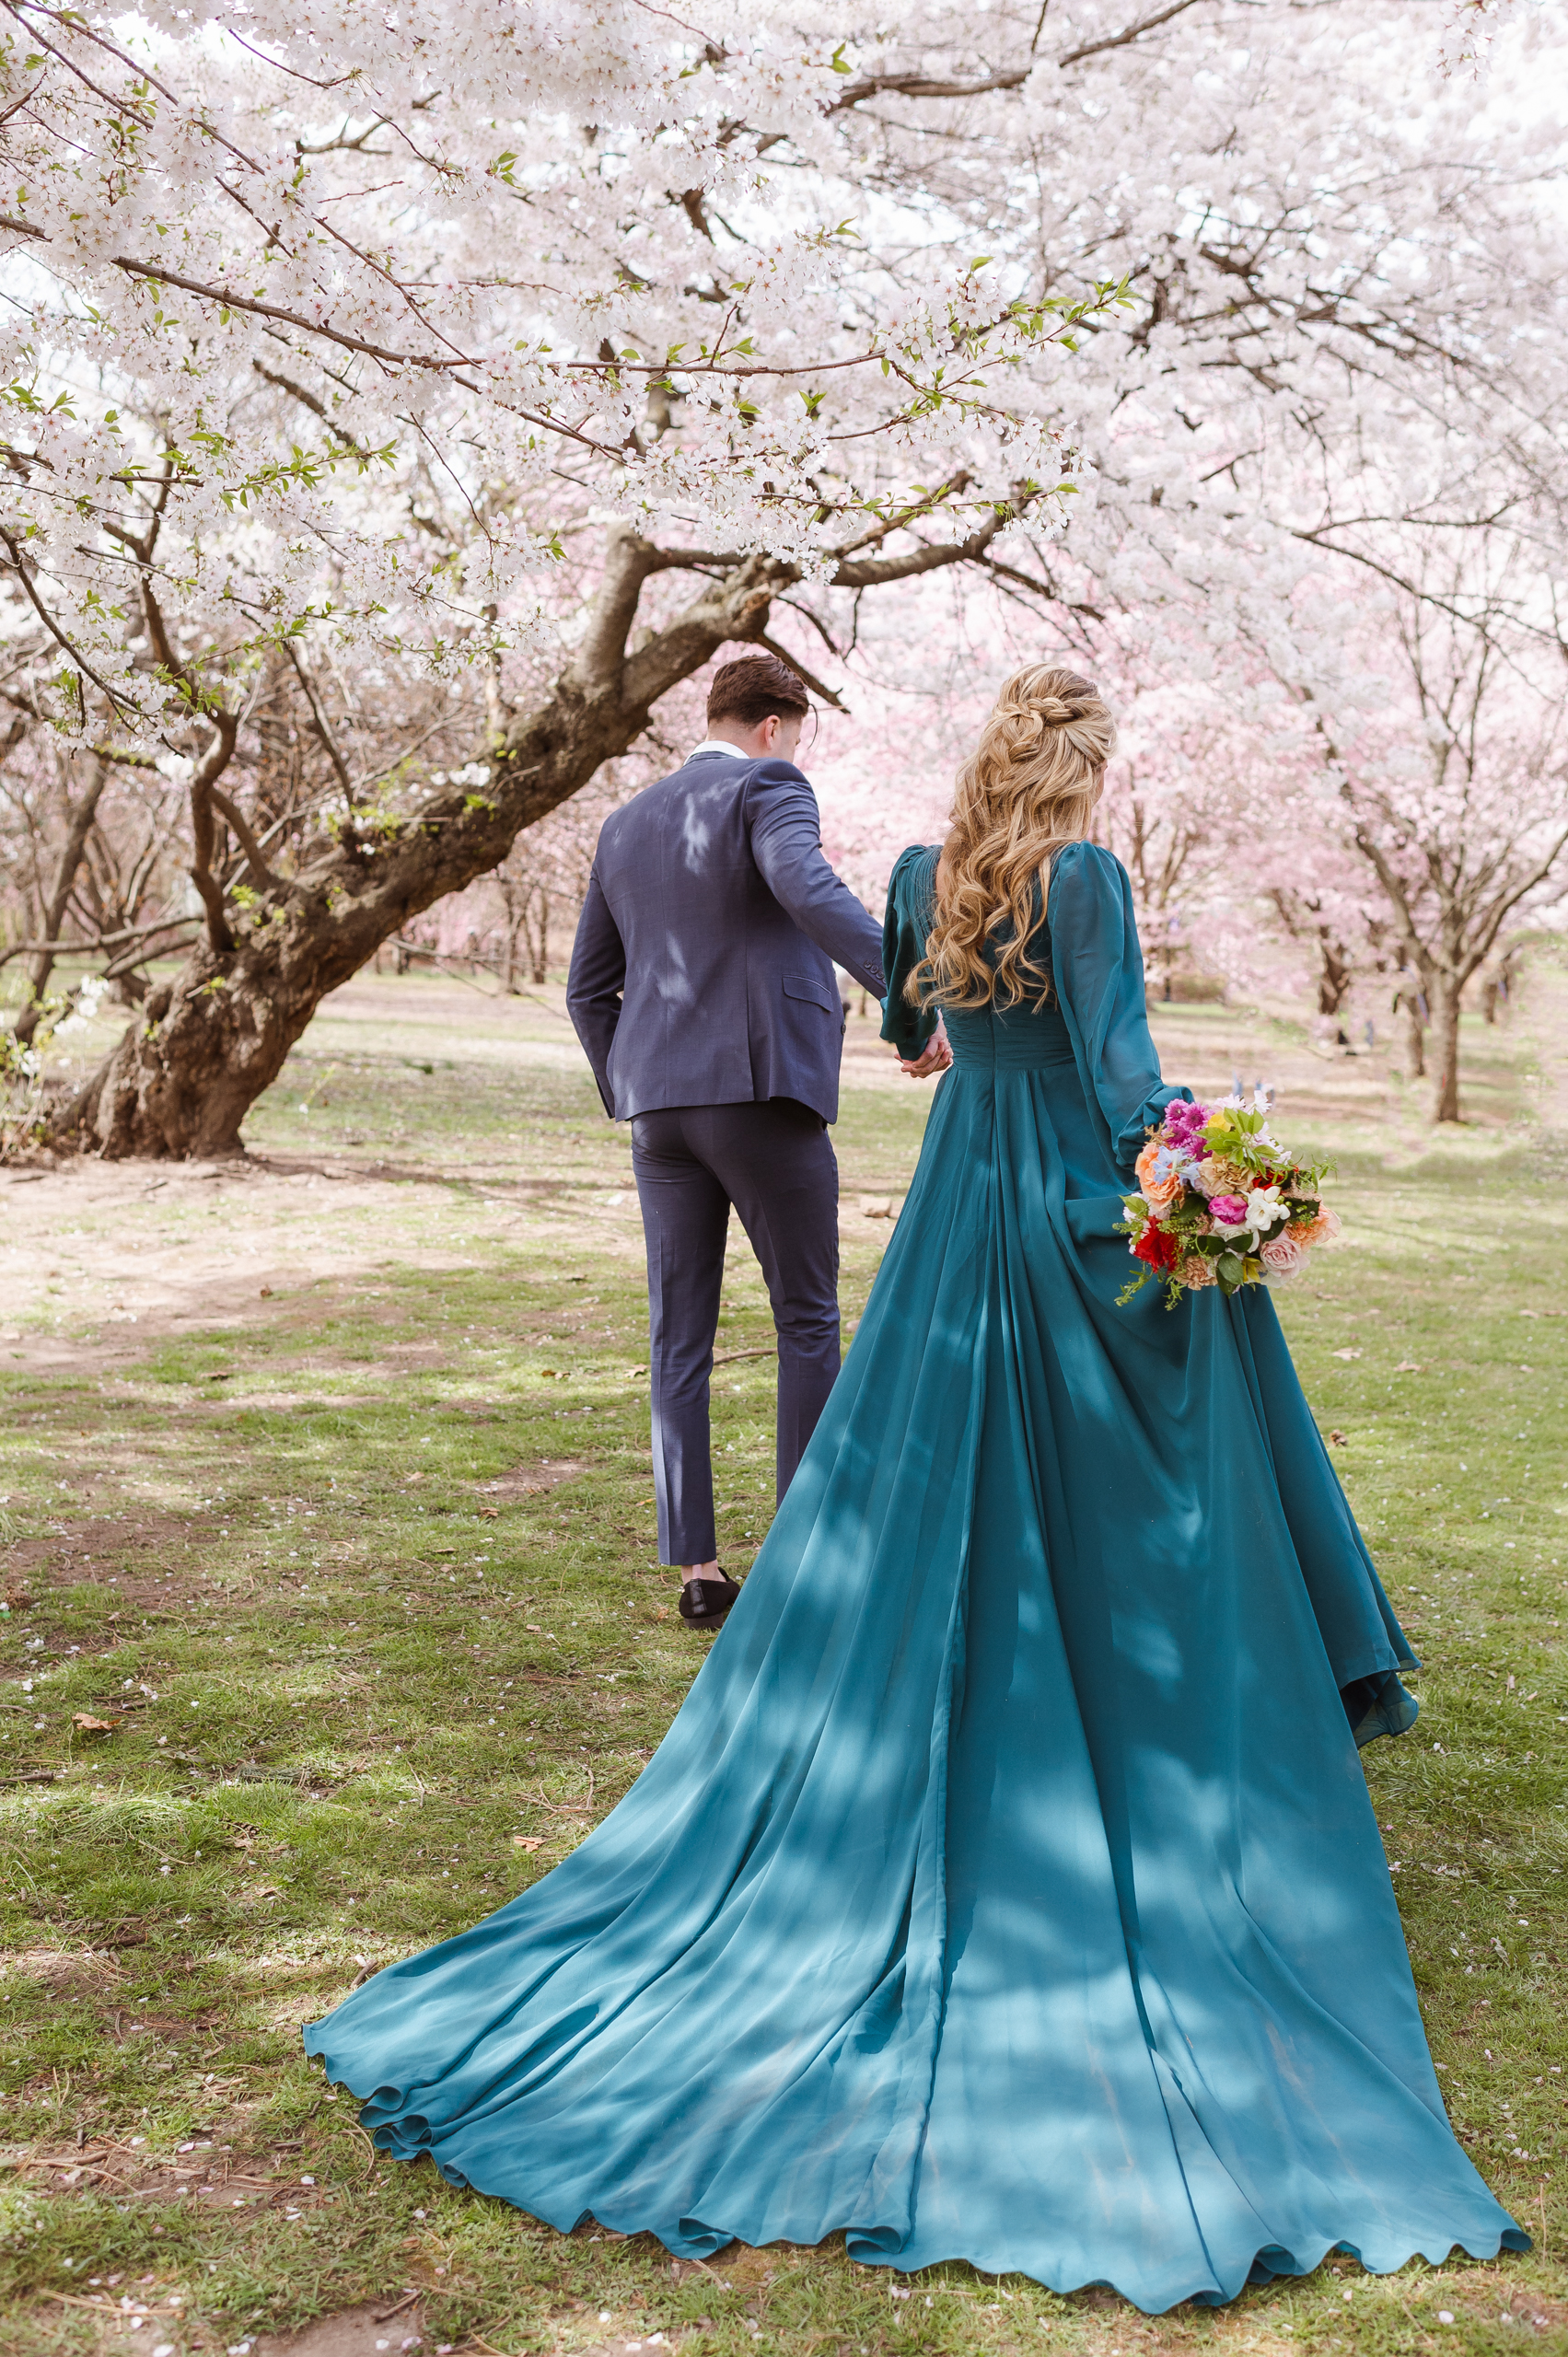 nj-engagement-couples-photos-by-suess-moments-at-new-jersey-branch-brook-park-cherry-blossoms-spring